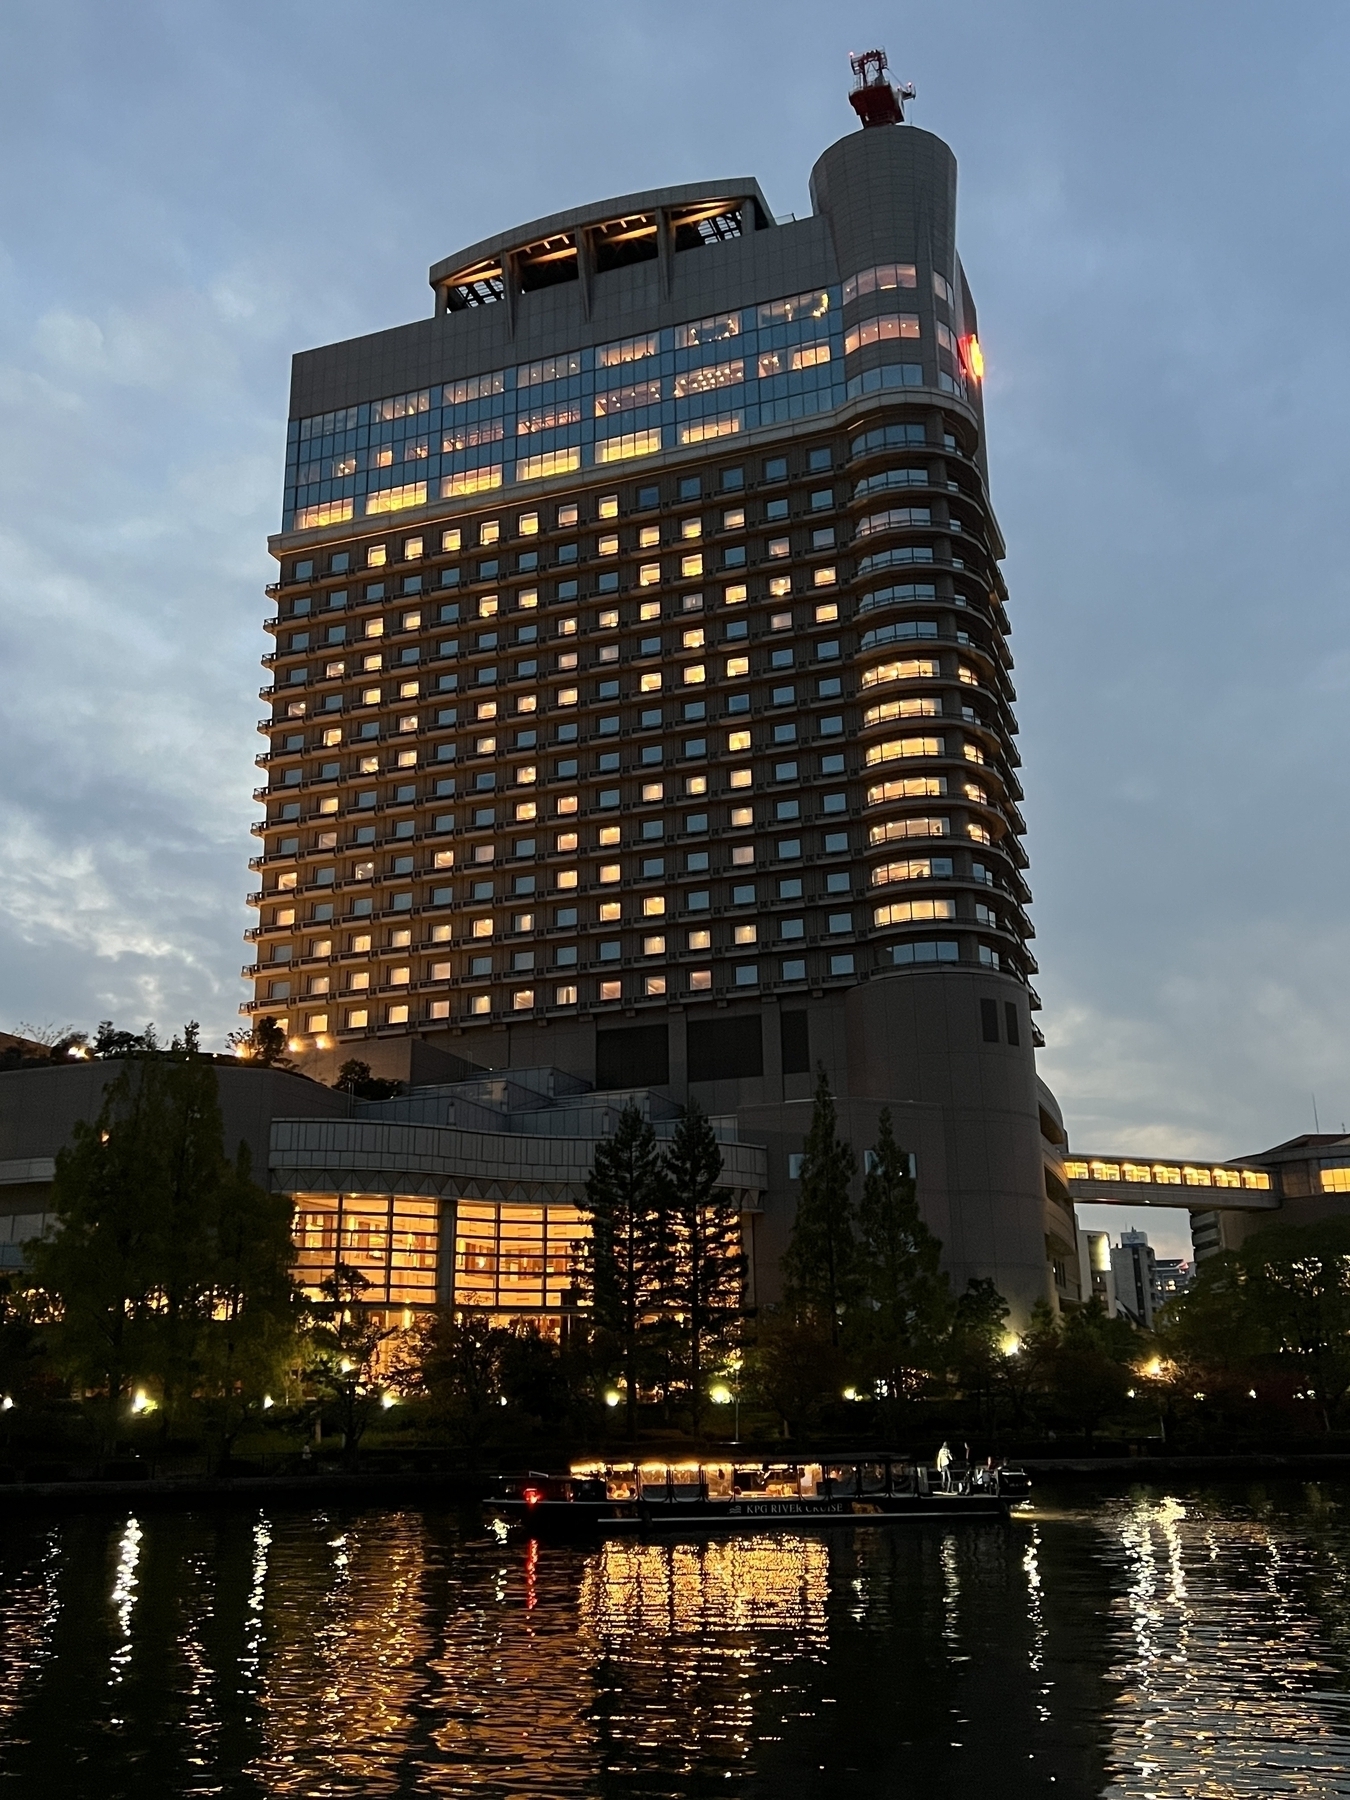 Early evening the Imperial Osaka Hotel is lit up. Below is the river in the foreground with a dinner boat passing by